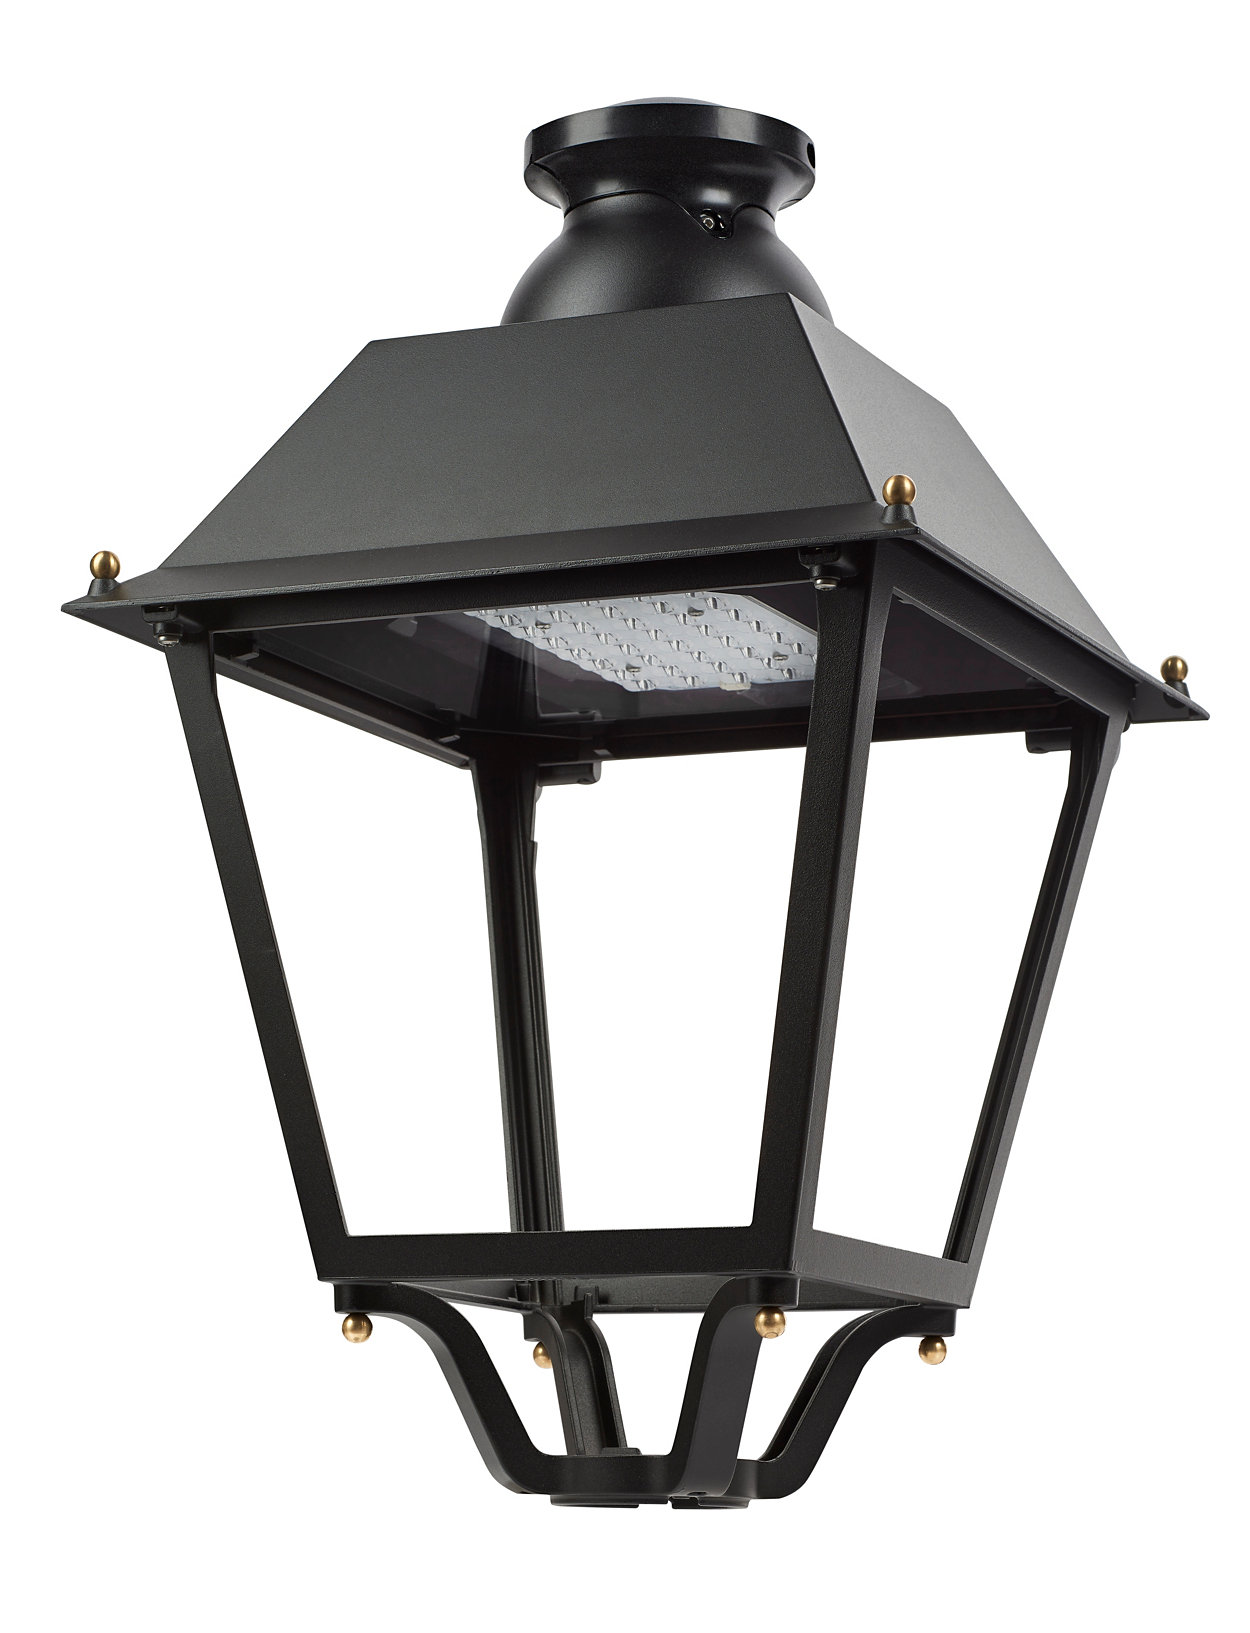 Jargeau LED gen3 –- combining historical design with modern lighting technology